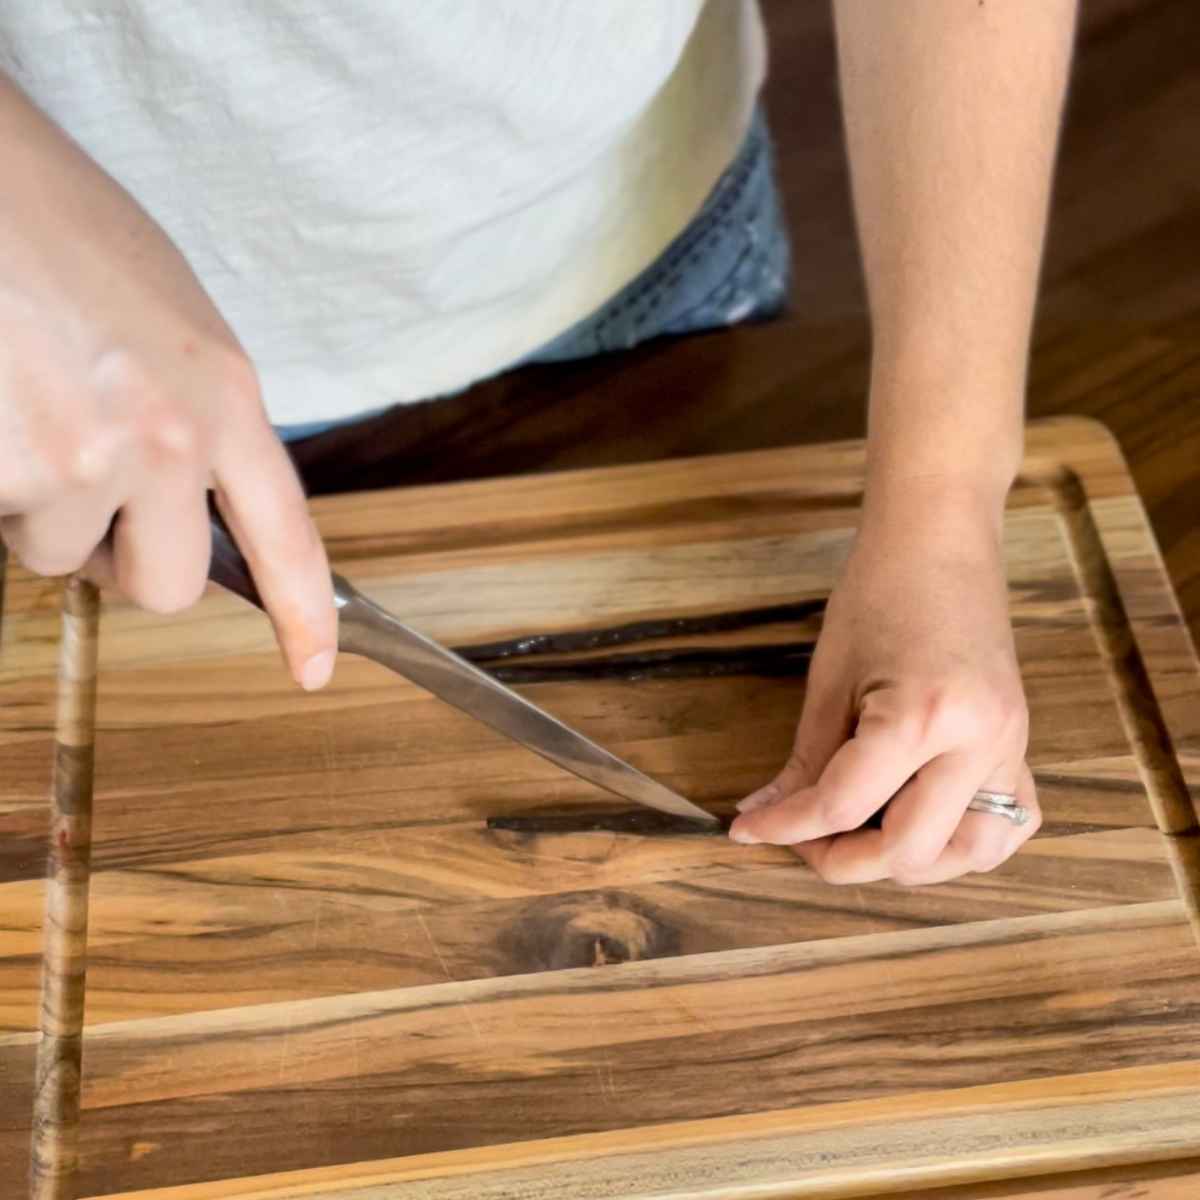 woman using a sharp knife to cut vanilla beans length wise